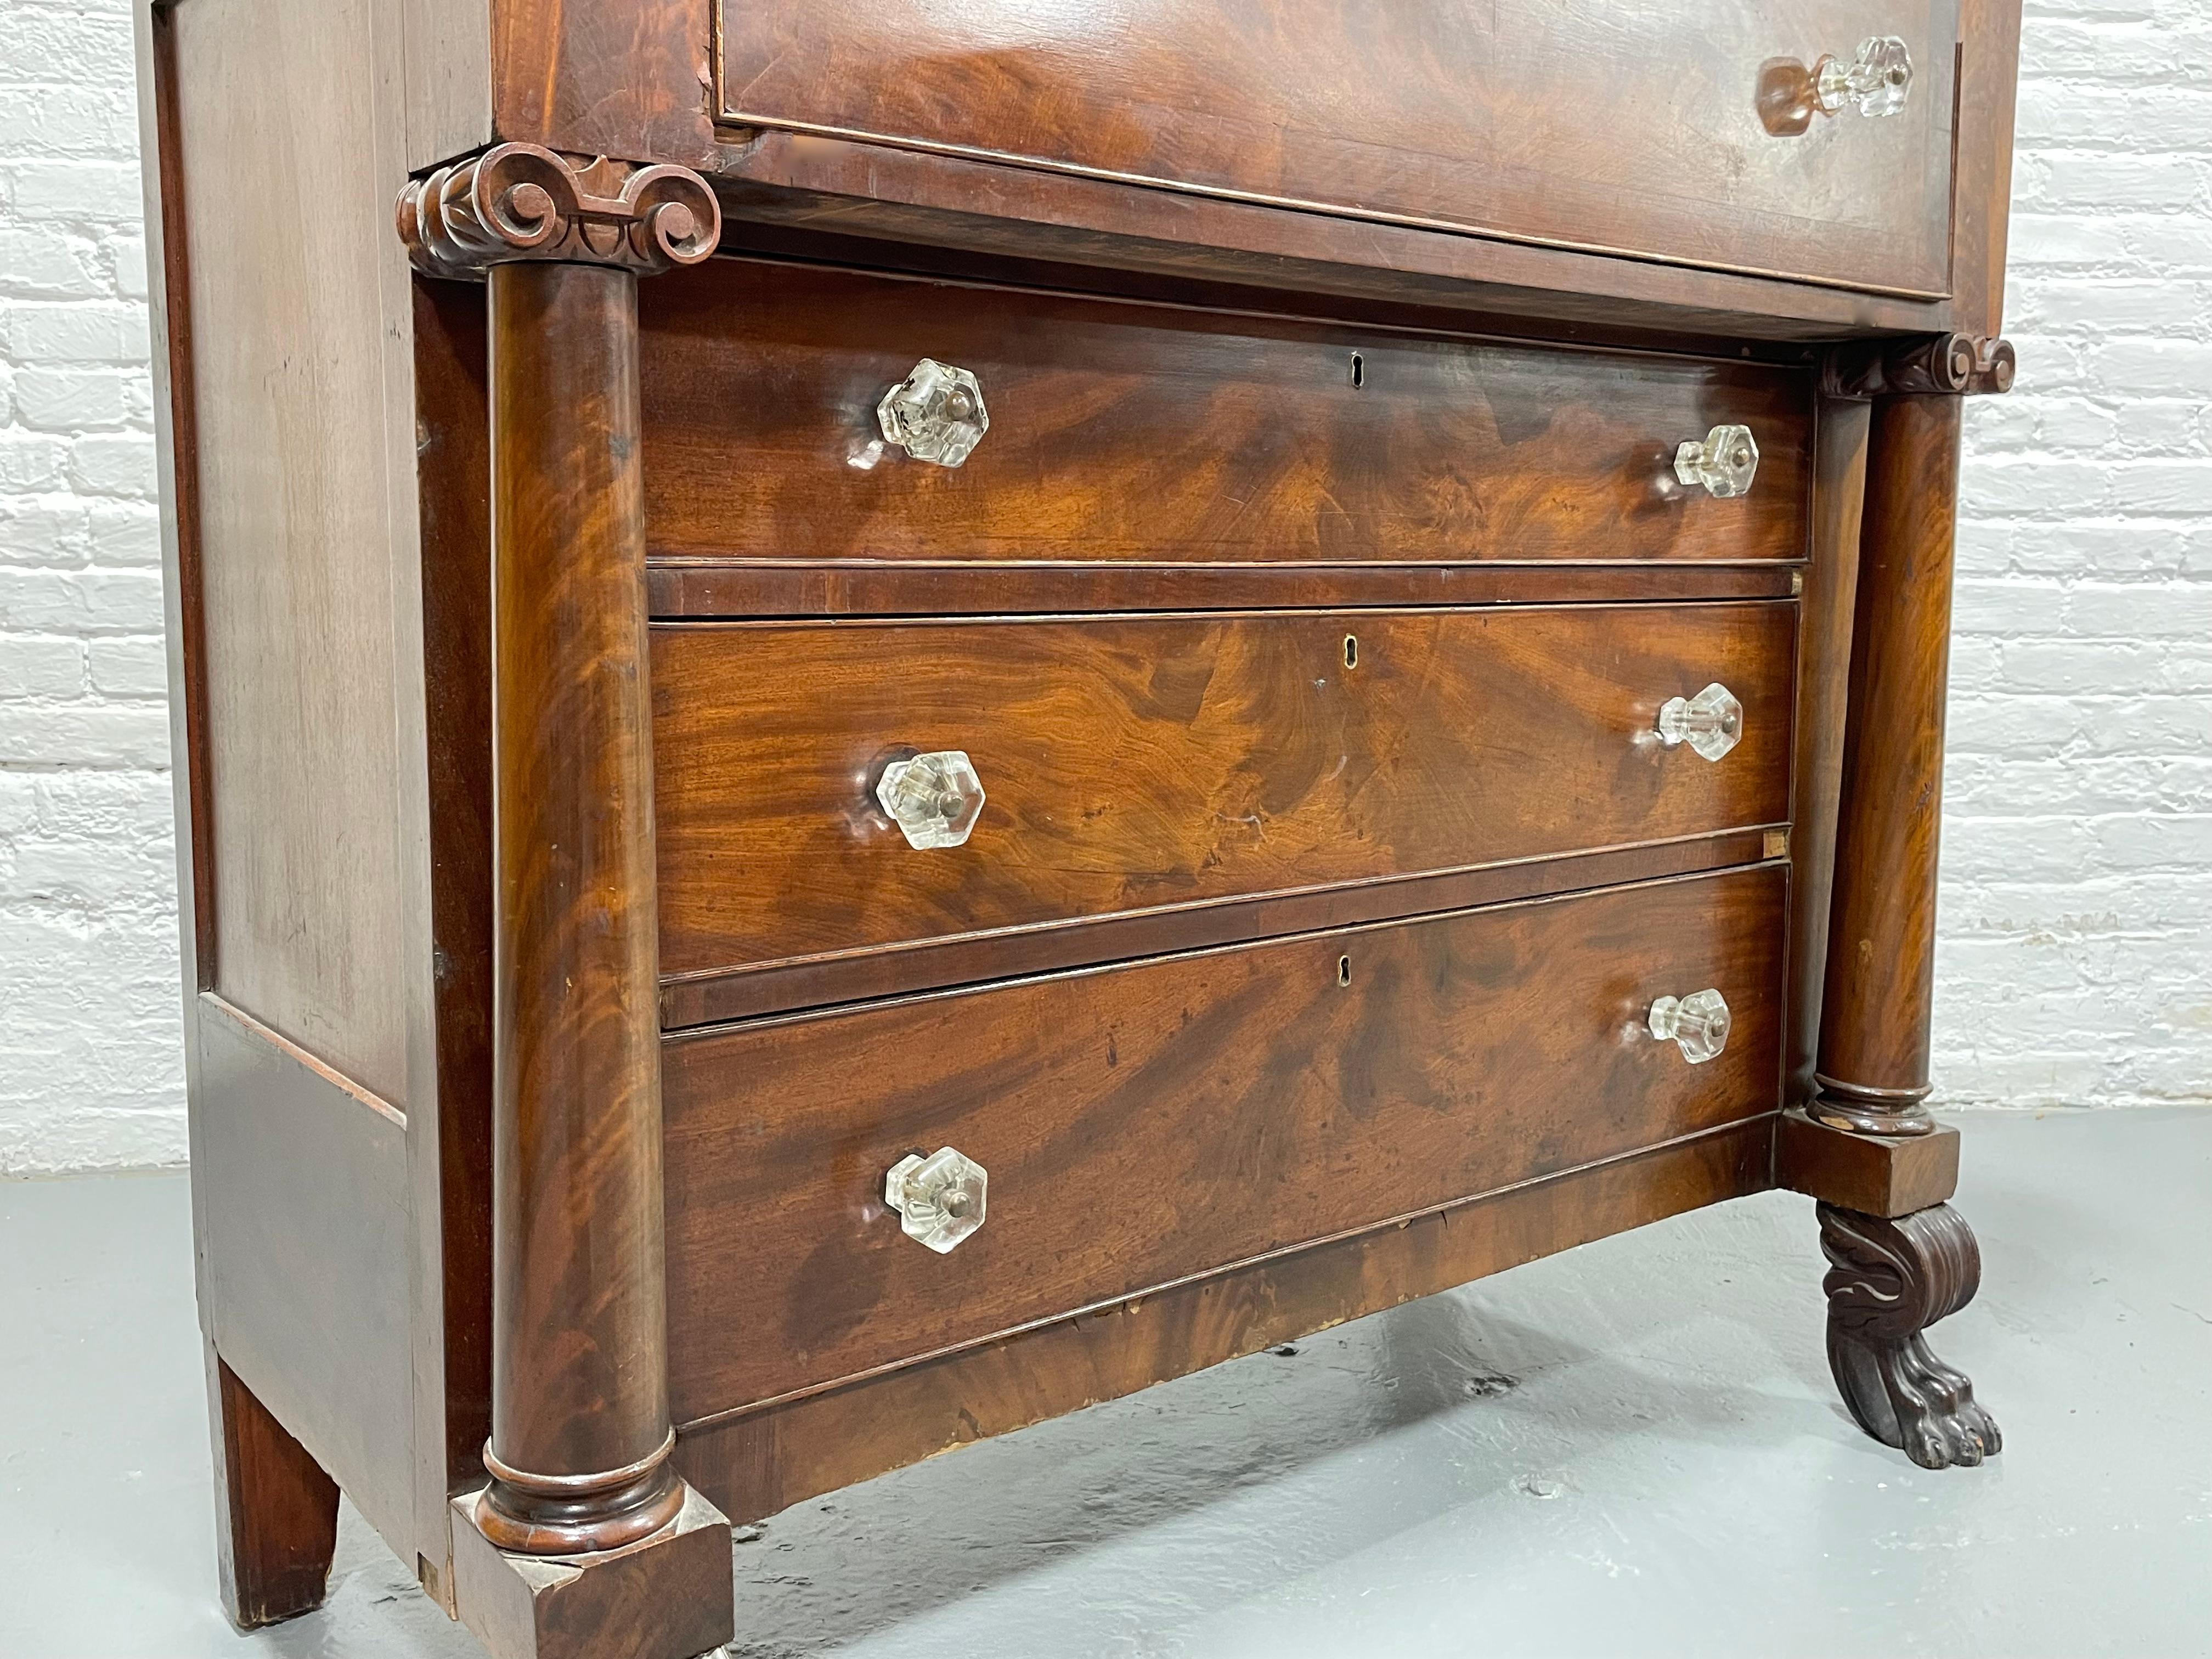 Antique Empire Period Mahogany Chest of Drawers, c. 1850’s In Good Condition For Sale In Weehawken, NJ